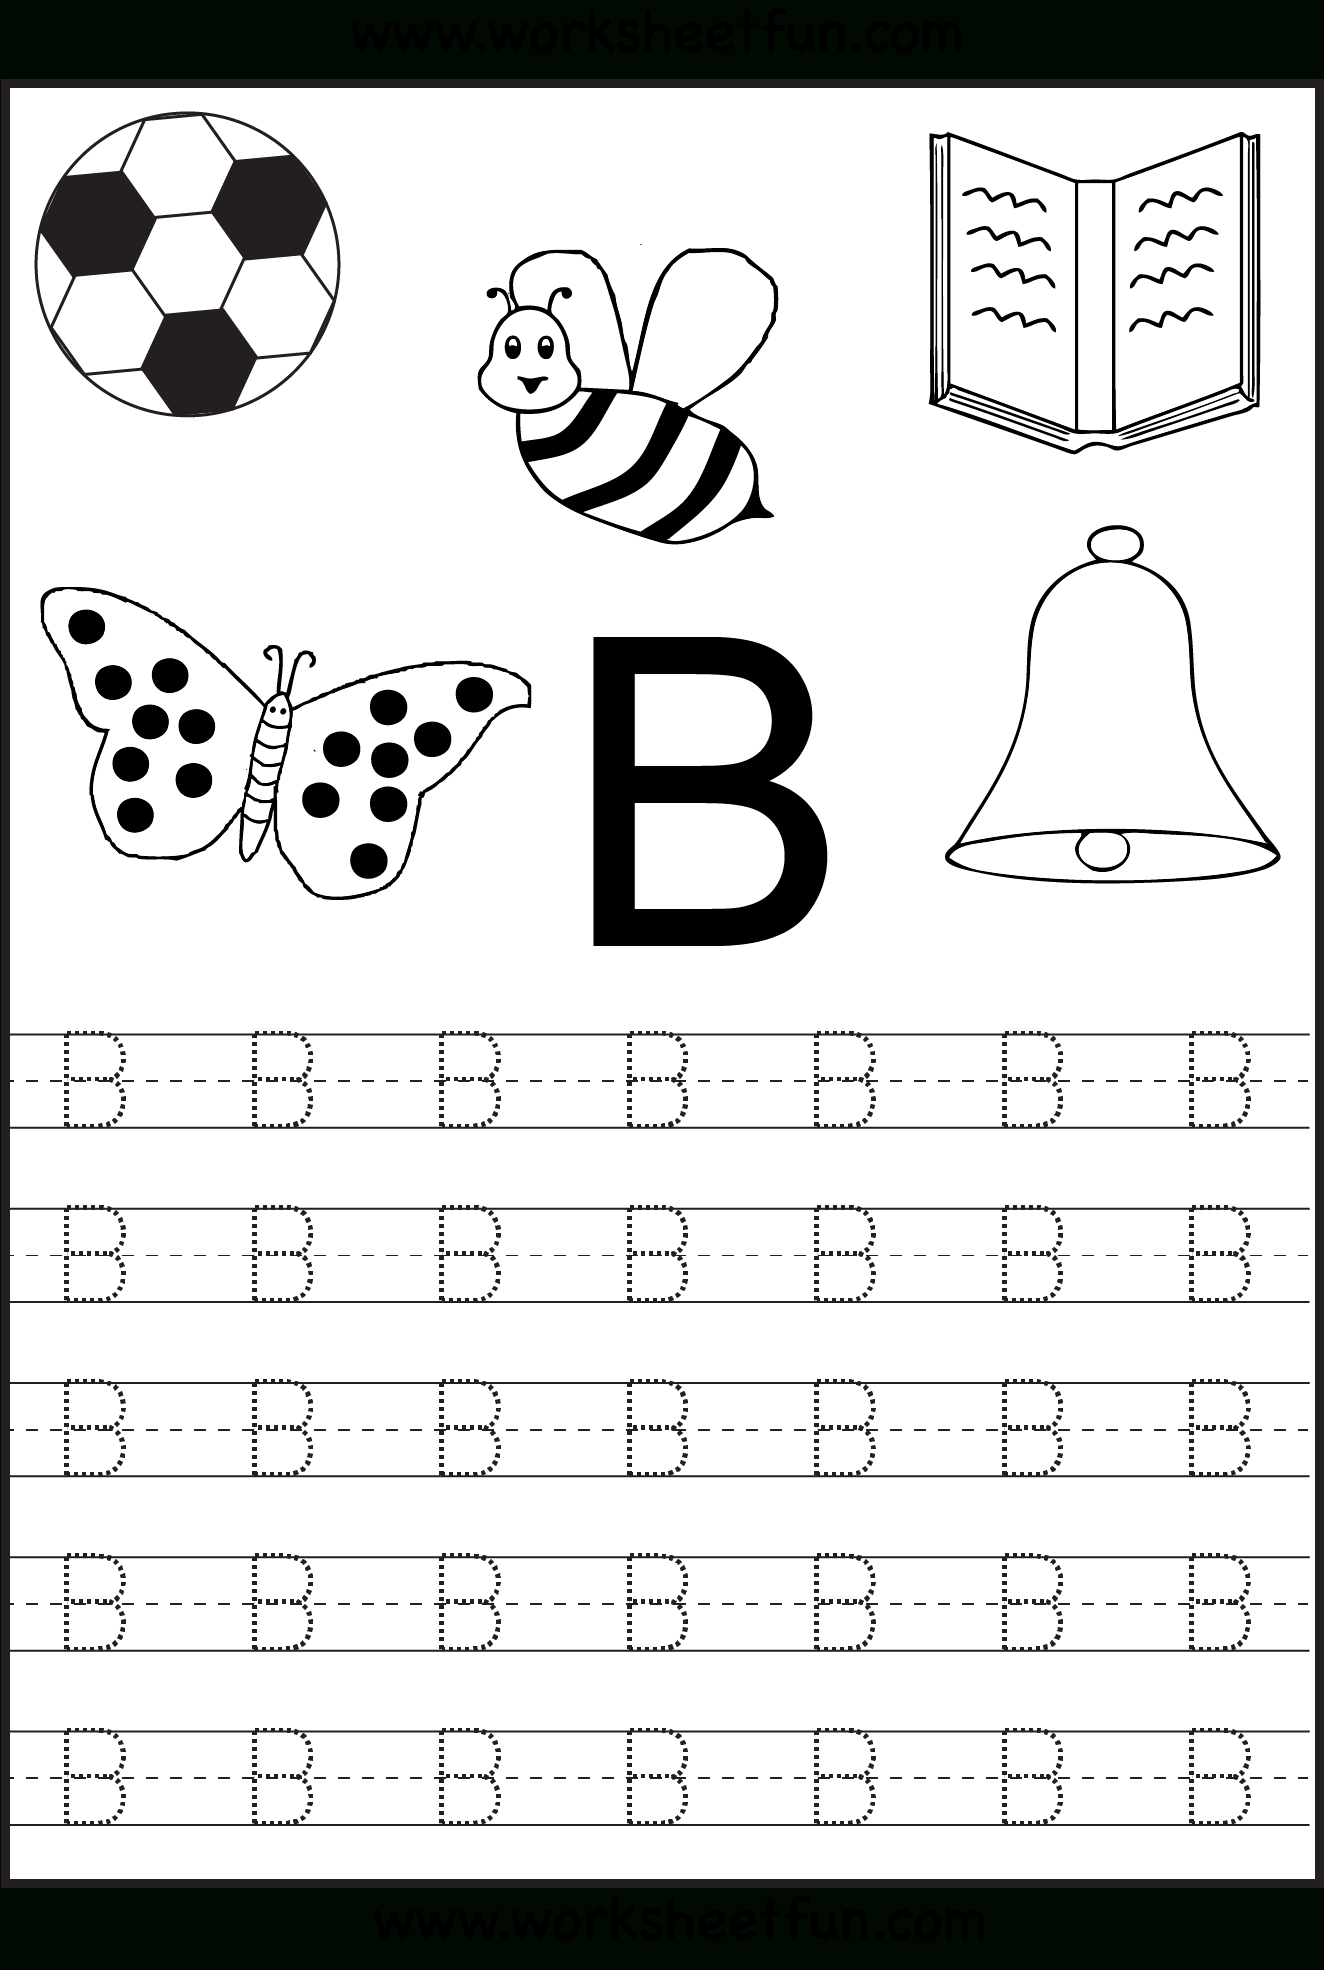 Tracing Worksheet Of Alphabet Letters Free Printable Pdf Alphabet Tracing Worksheets For